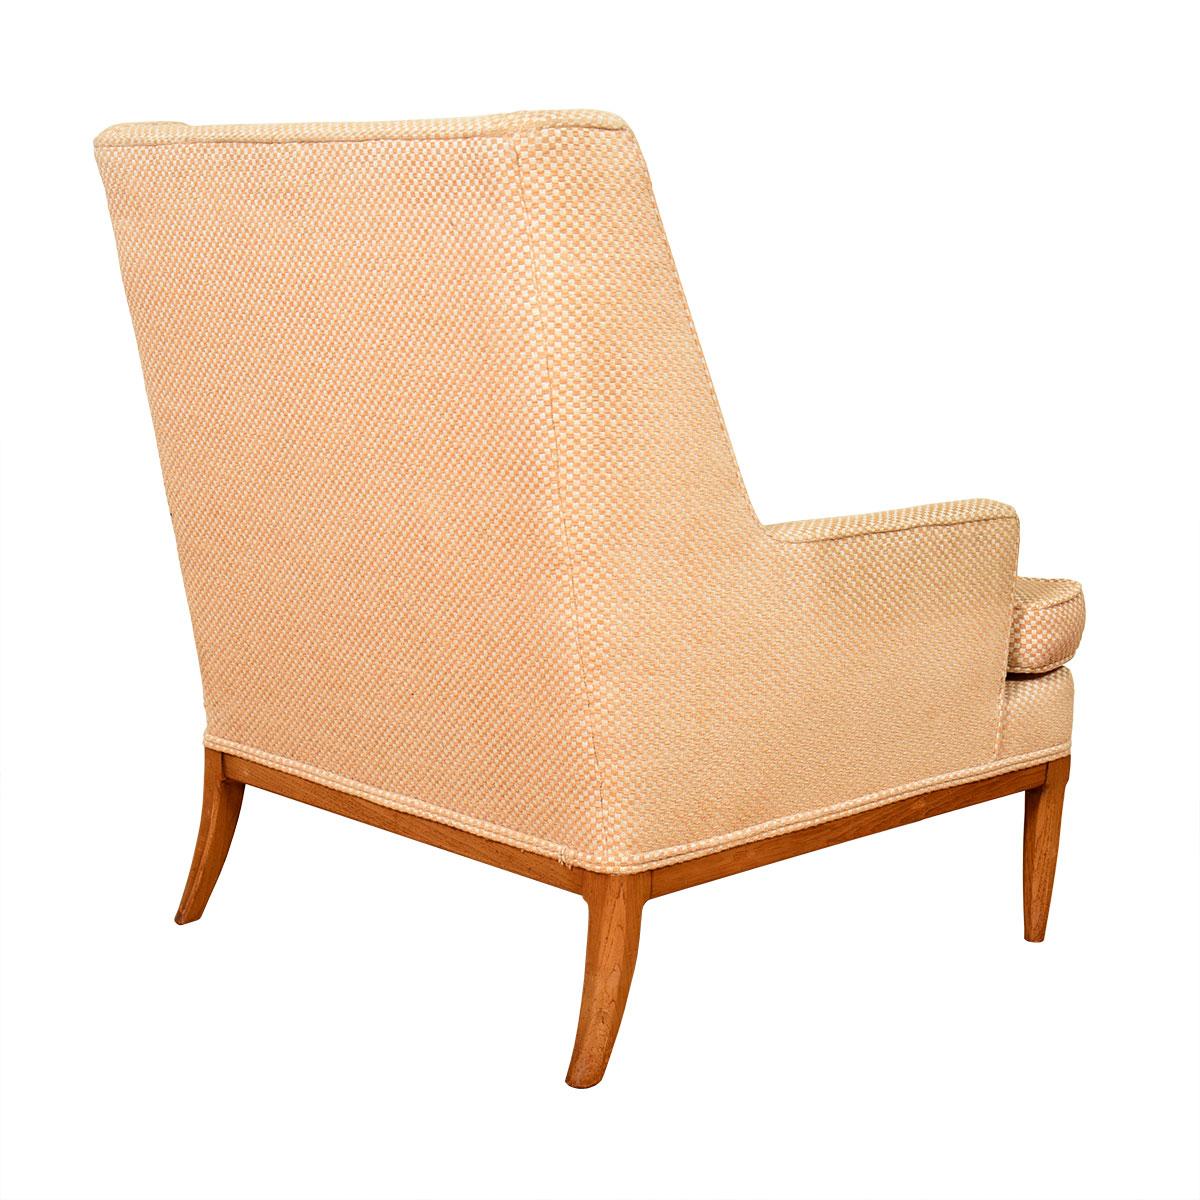 Paul McCobb Style Midcentury Upholstered Club Chair In Excellent Condition For Sale In Kensington, MD